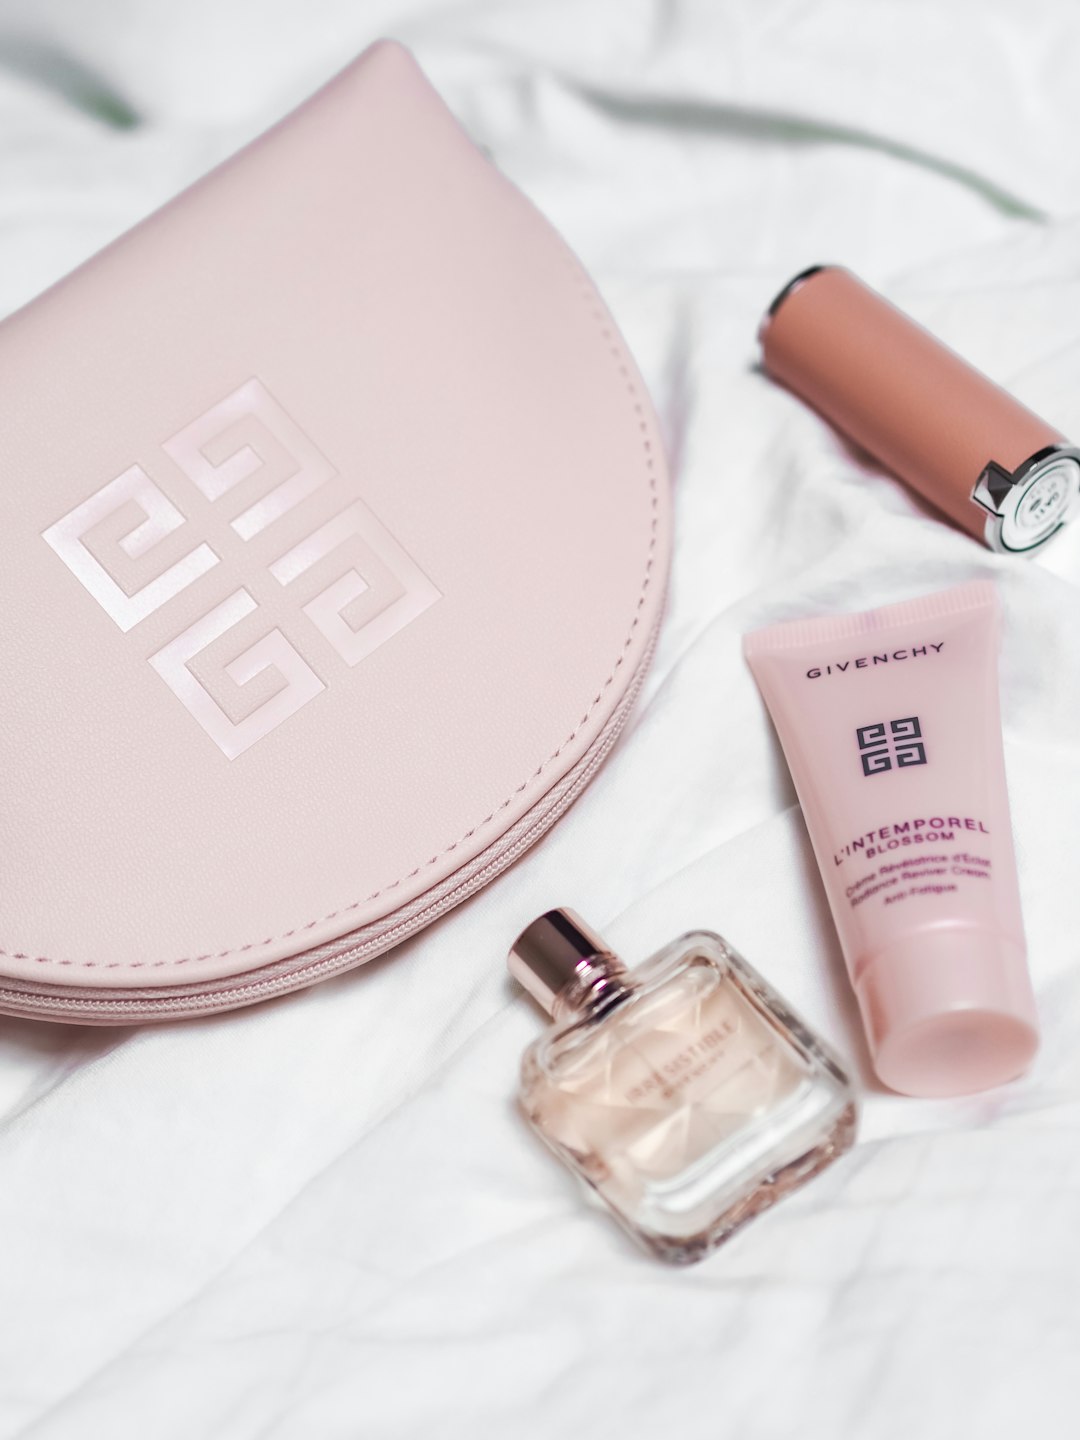 #IrresistibleIsYou by @Givenchy @GivenchyBeauty. 💗  Irresistible Perfume, Lipstick and Pouch with logo. Photo by Laura Chouette ©FreeUse2020 (Thanks to MarionnaudAustria)